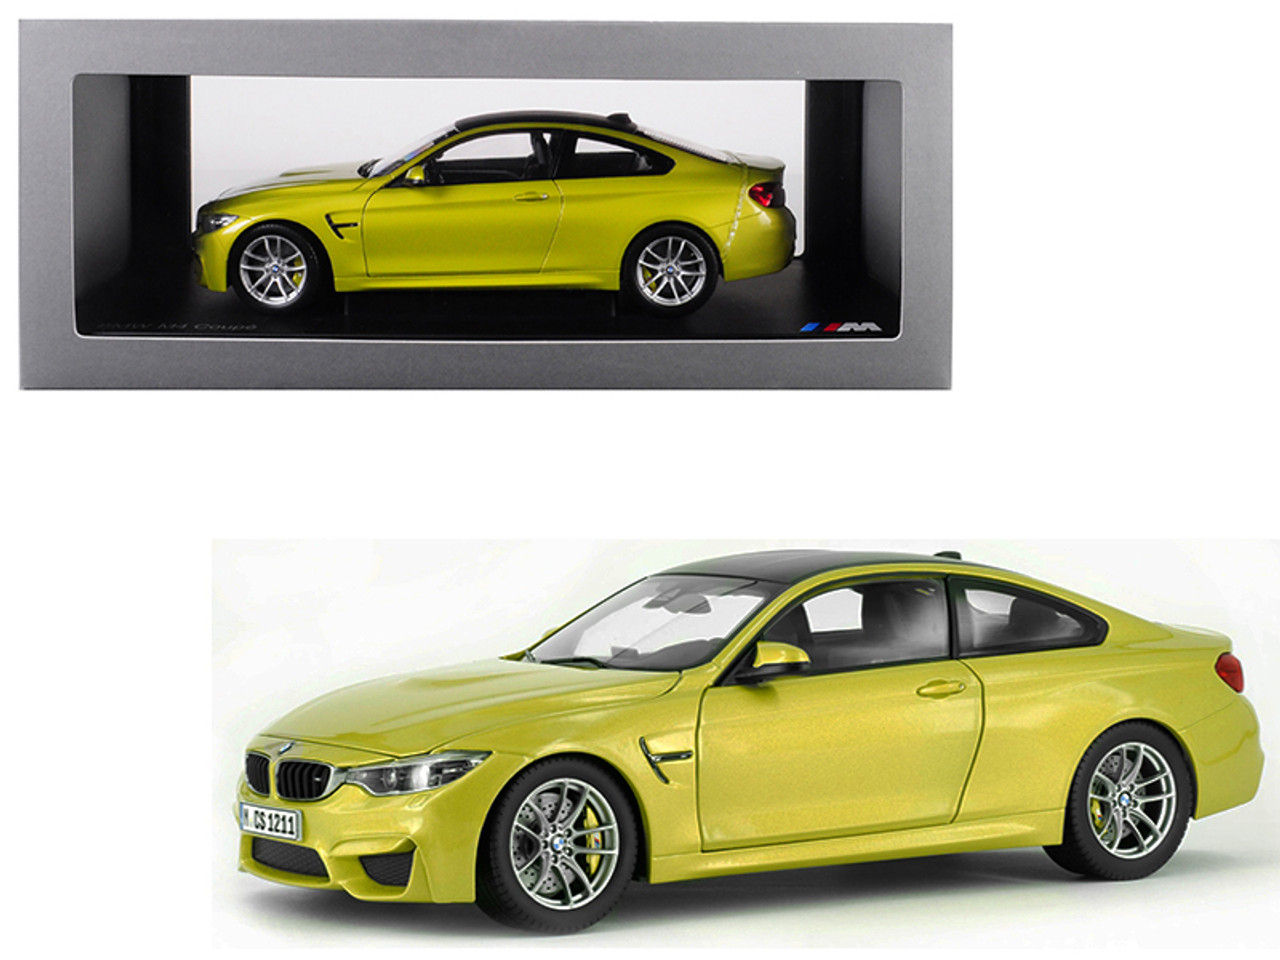 1/18 Paragon BMW F82 M4 Coupe (Austin Yellow with Carbon Top) Diecast Car  Model